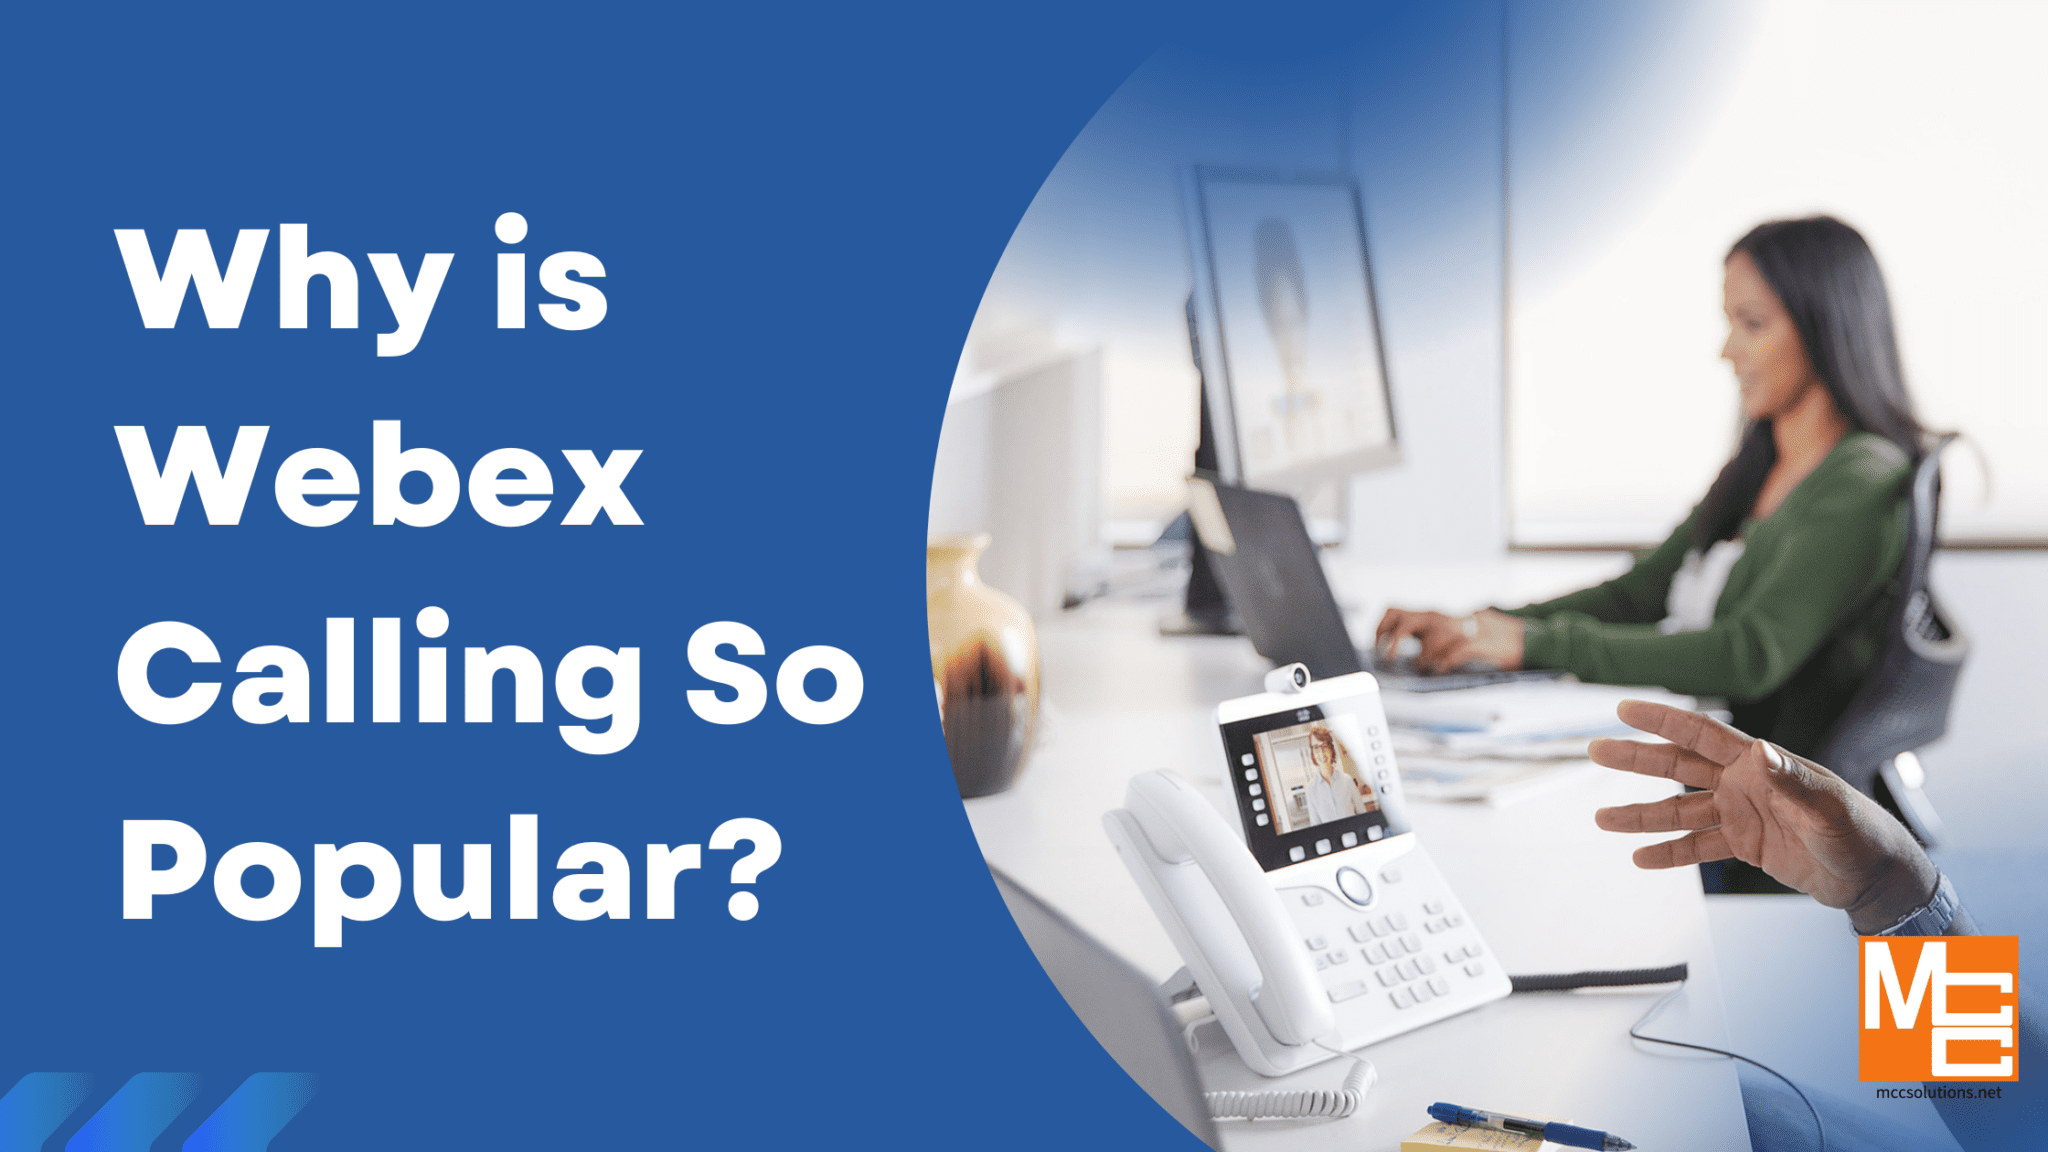 Why is Webex Calling So Popular?